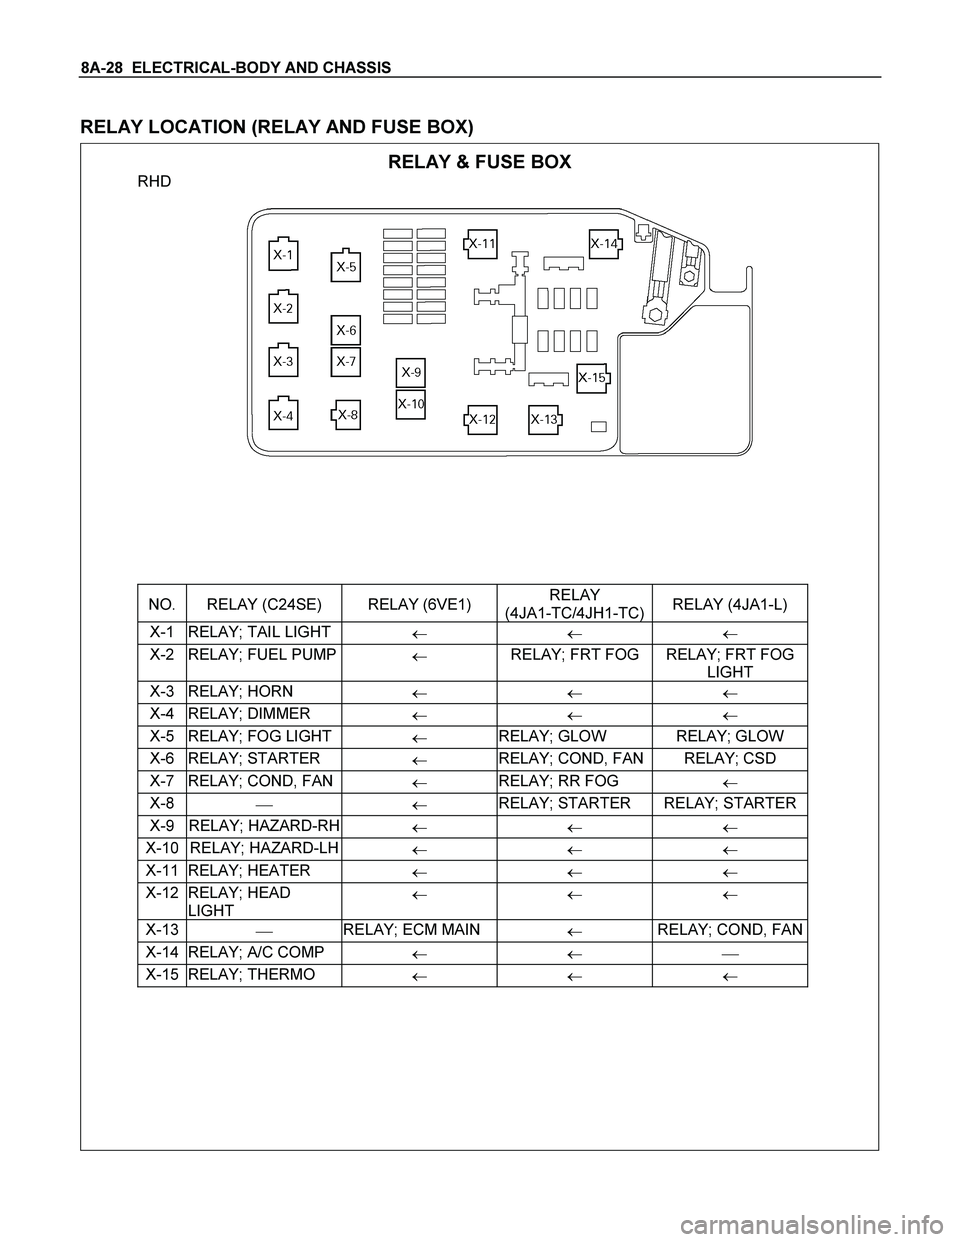 ISUZU TF SERIES 2004  Workshop Manual 8A-28  ELECTRICAL-BODY AND CHASSIS 
 
RELAY LOCATION (RELAY AND FUSE BOX) 
 RELAY & FUSE BOX 
RHD 
 
 
 
 
 
 
 
 
 
 
 
 
 
 
 
 
 
 
 
 
 
NO.  RELAY (C24SE)  RELAY (6VE1) RELAY  
(4JA1-TC/4JH1-TC)R